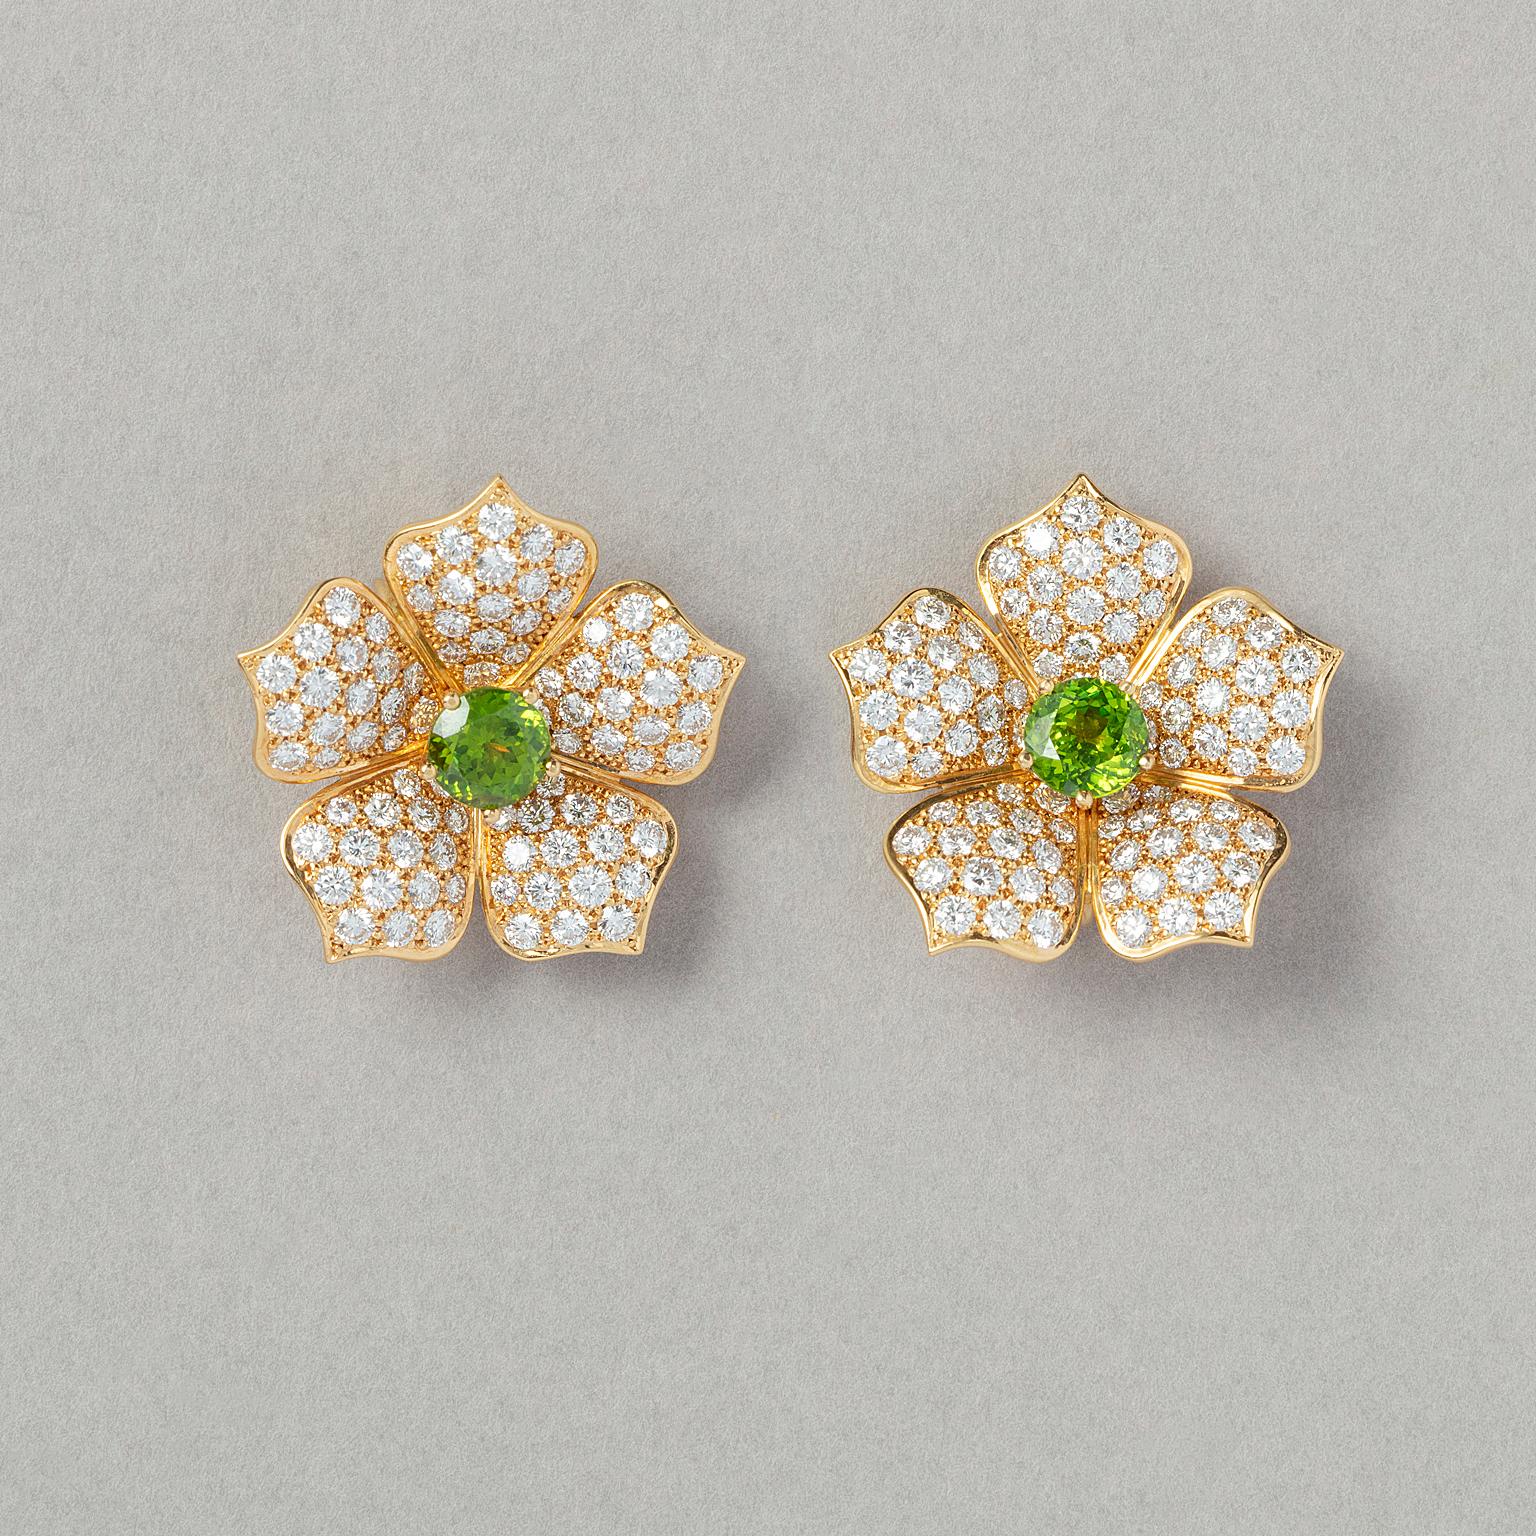 A pair of 18 carat yellow gold lotus flower earrings, each set with a demantoid garnet in a five claw chaton in he centre (app. 2.35 carat in total) surrounded by five flower petals that are pavé set with brilliant cut diamonds (app. 4.63 carat in